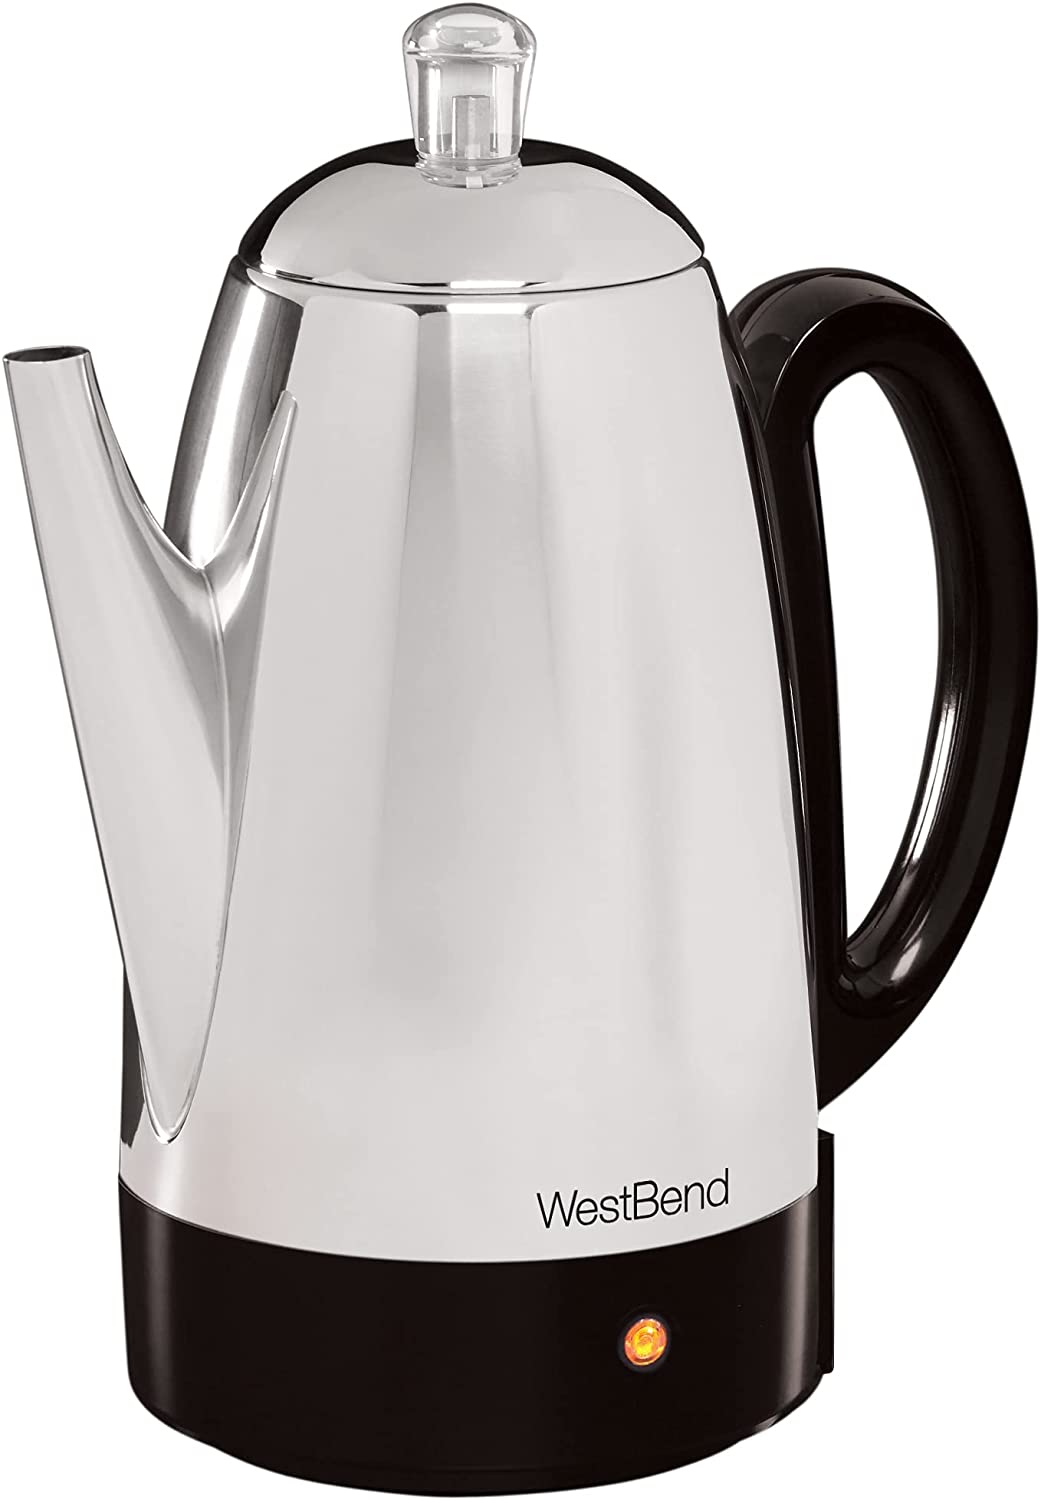 West Bend 54159 Classic Stainless Steel